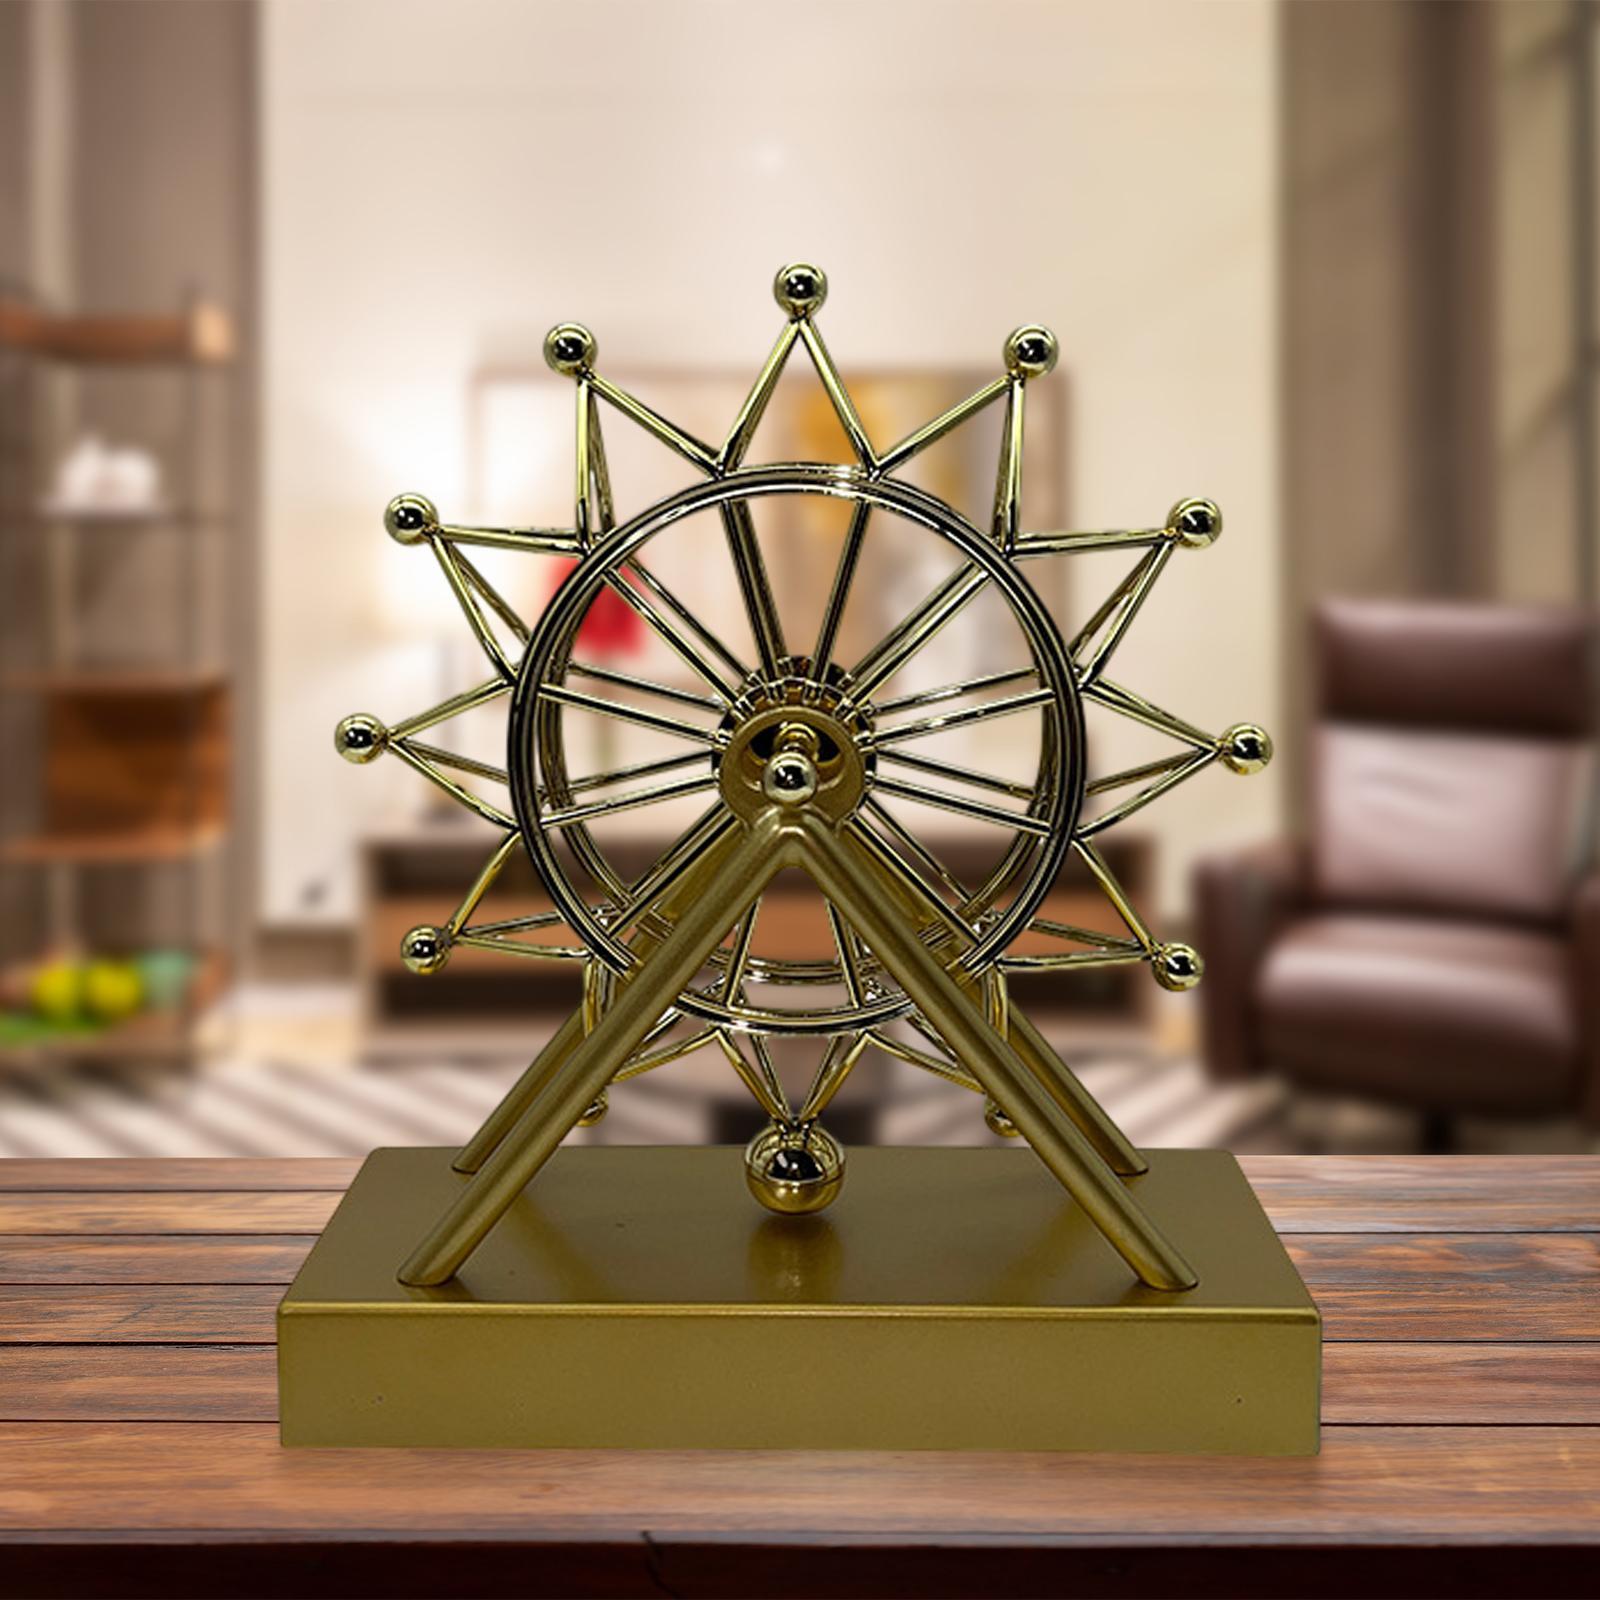 Wheel Ornament Home Office Decoration Balancing Physical Science Toy